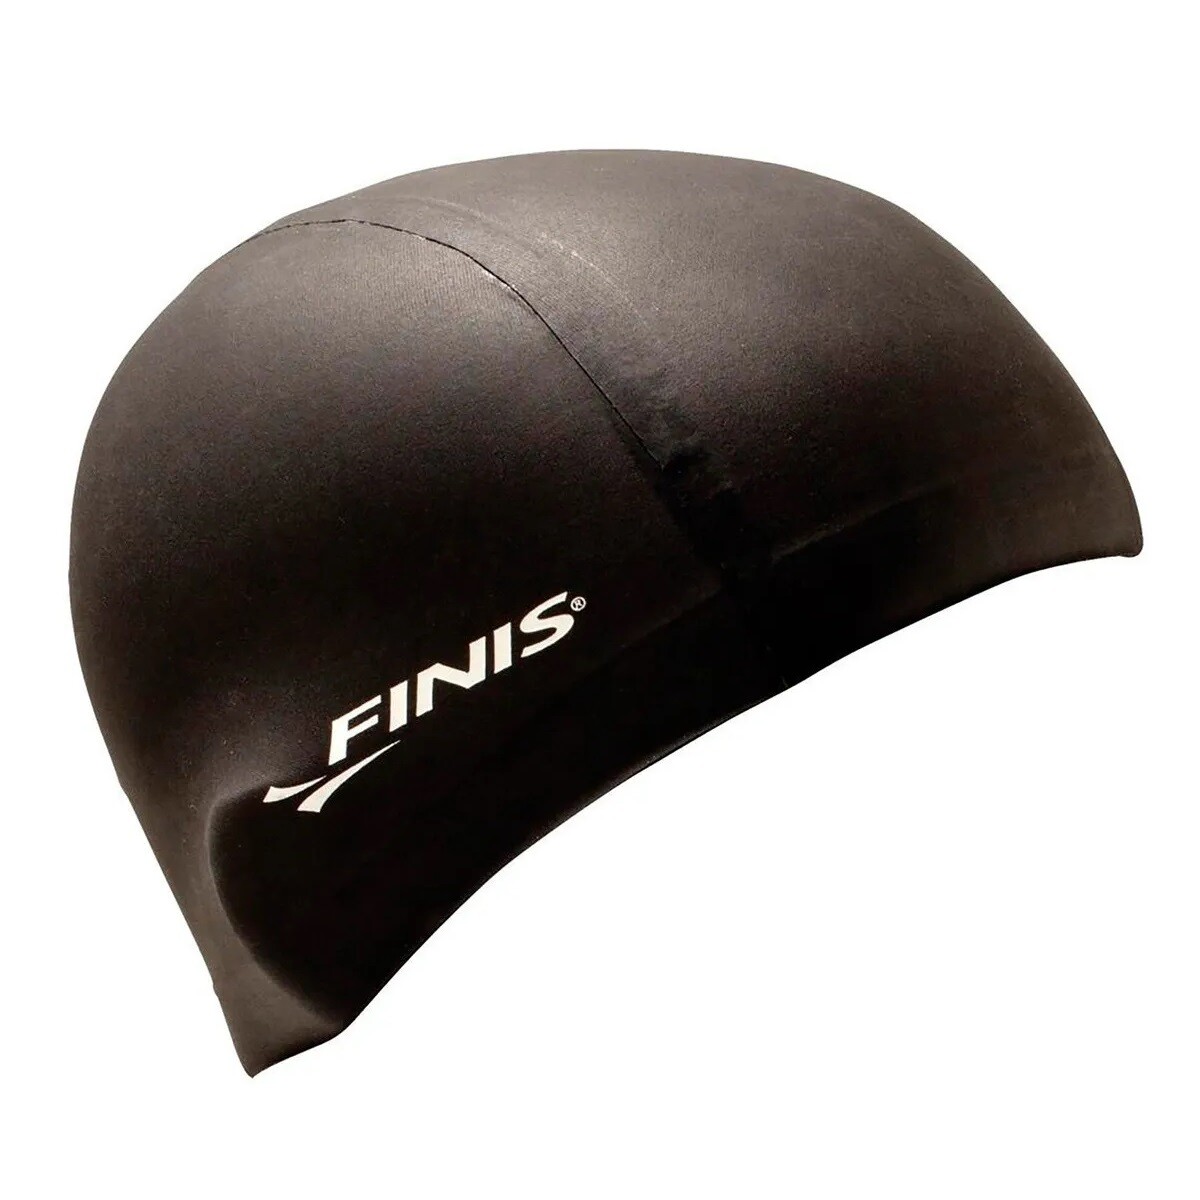 Hydrospeed Dome Cap Large Finis 